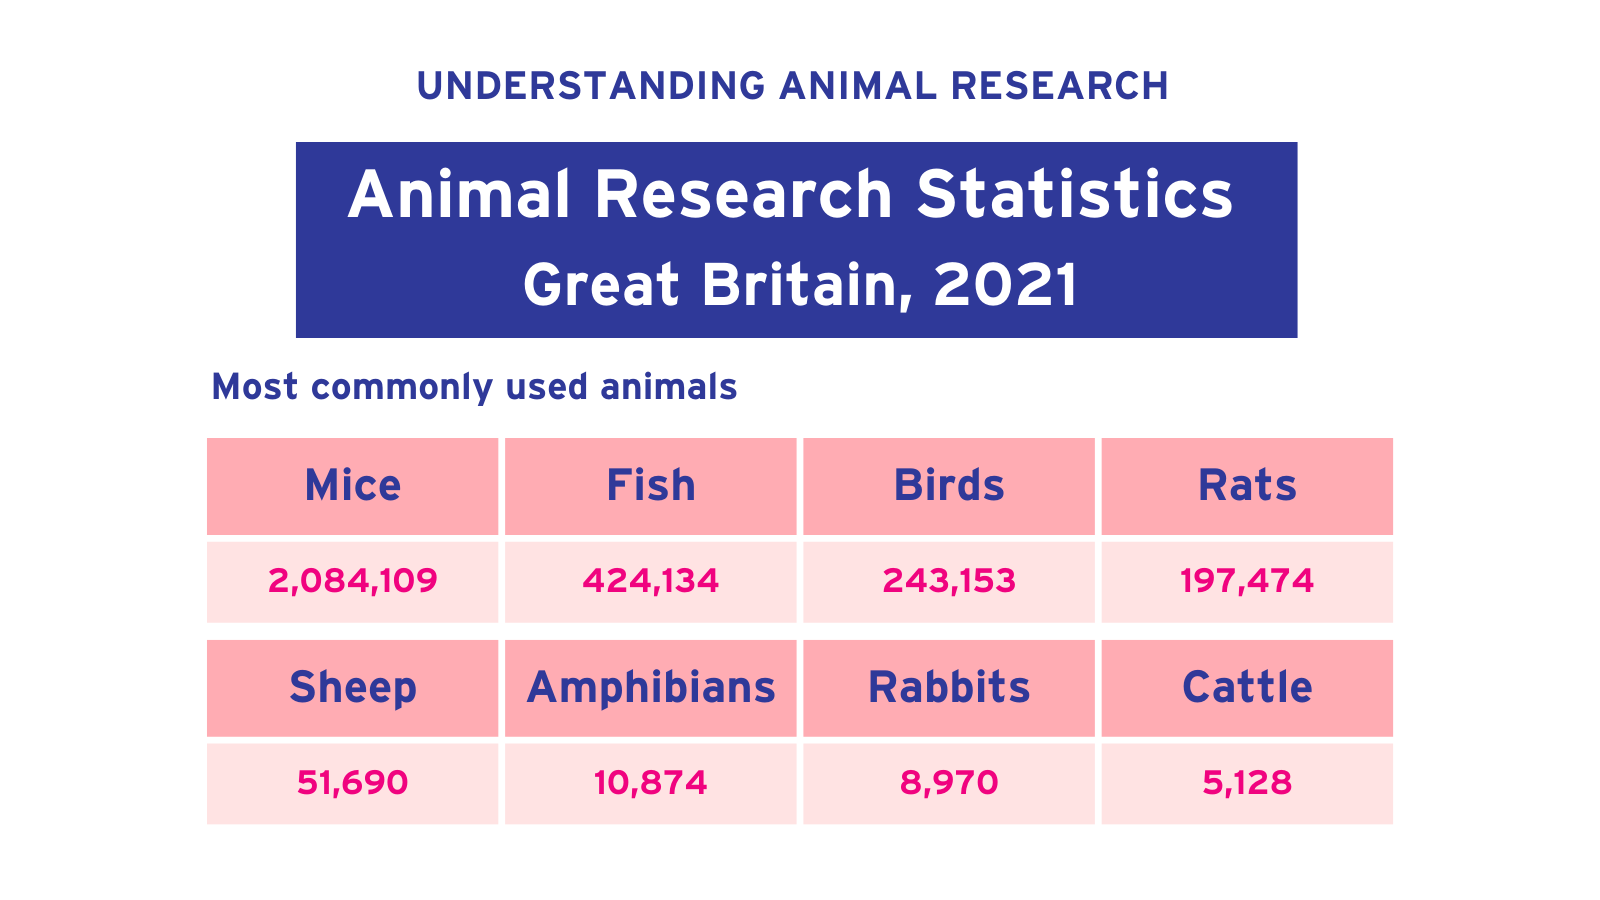 Animal research statistics for Great Britain, 2021 (most used species)